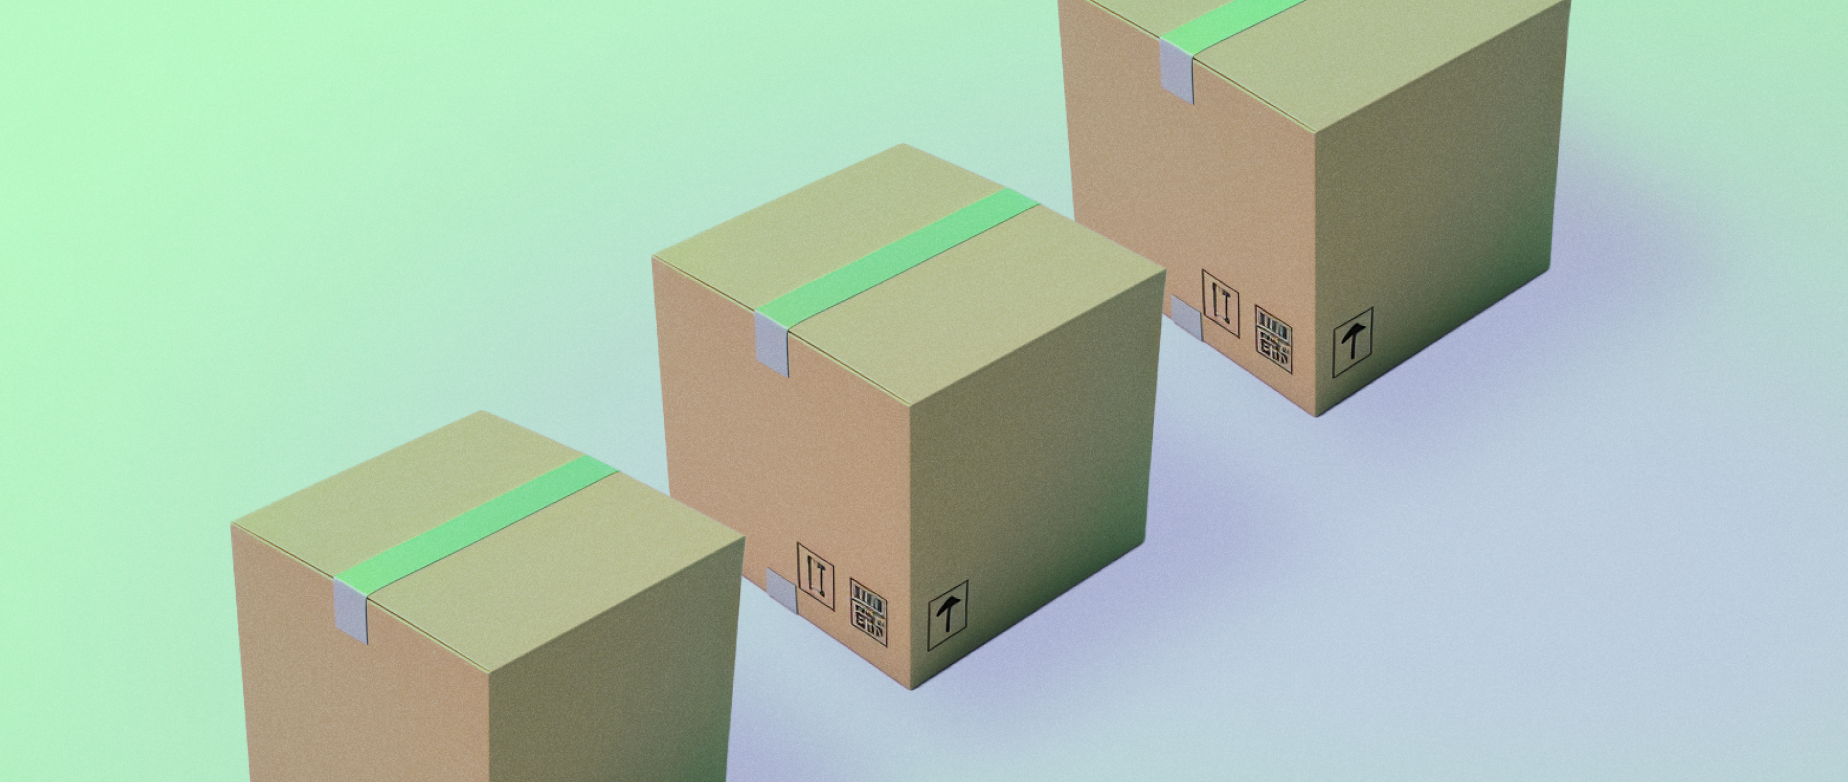 Three shipping boxes on a light green background.